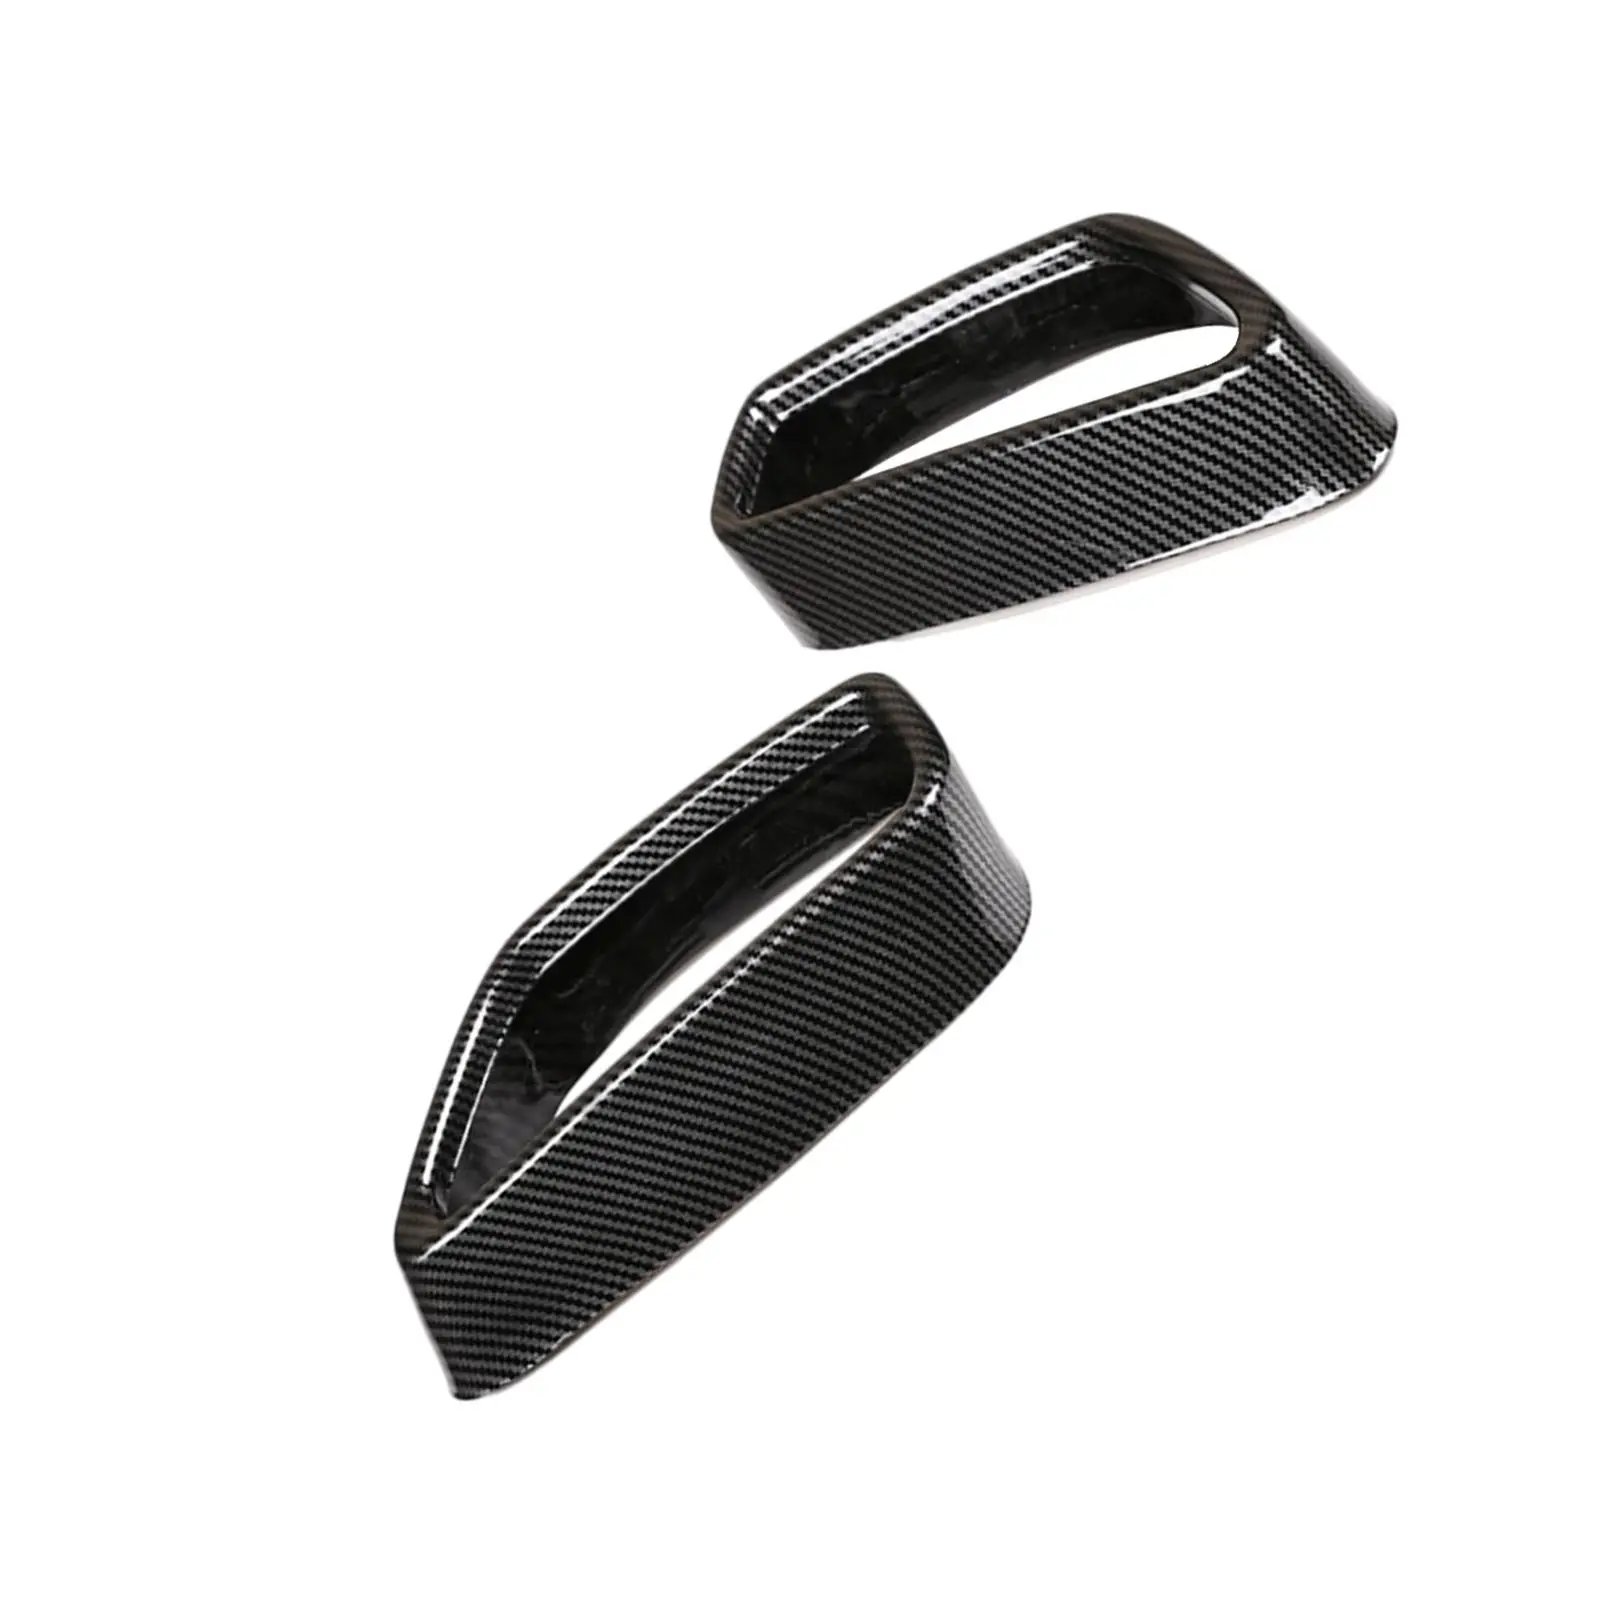 Pack of 2 Rear Exhaust Pipe Throat Cover Trim Tail Throat Frame for  5 Series G30 G38 2018 2019 2020 2021